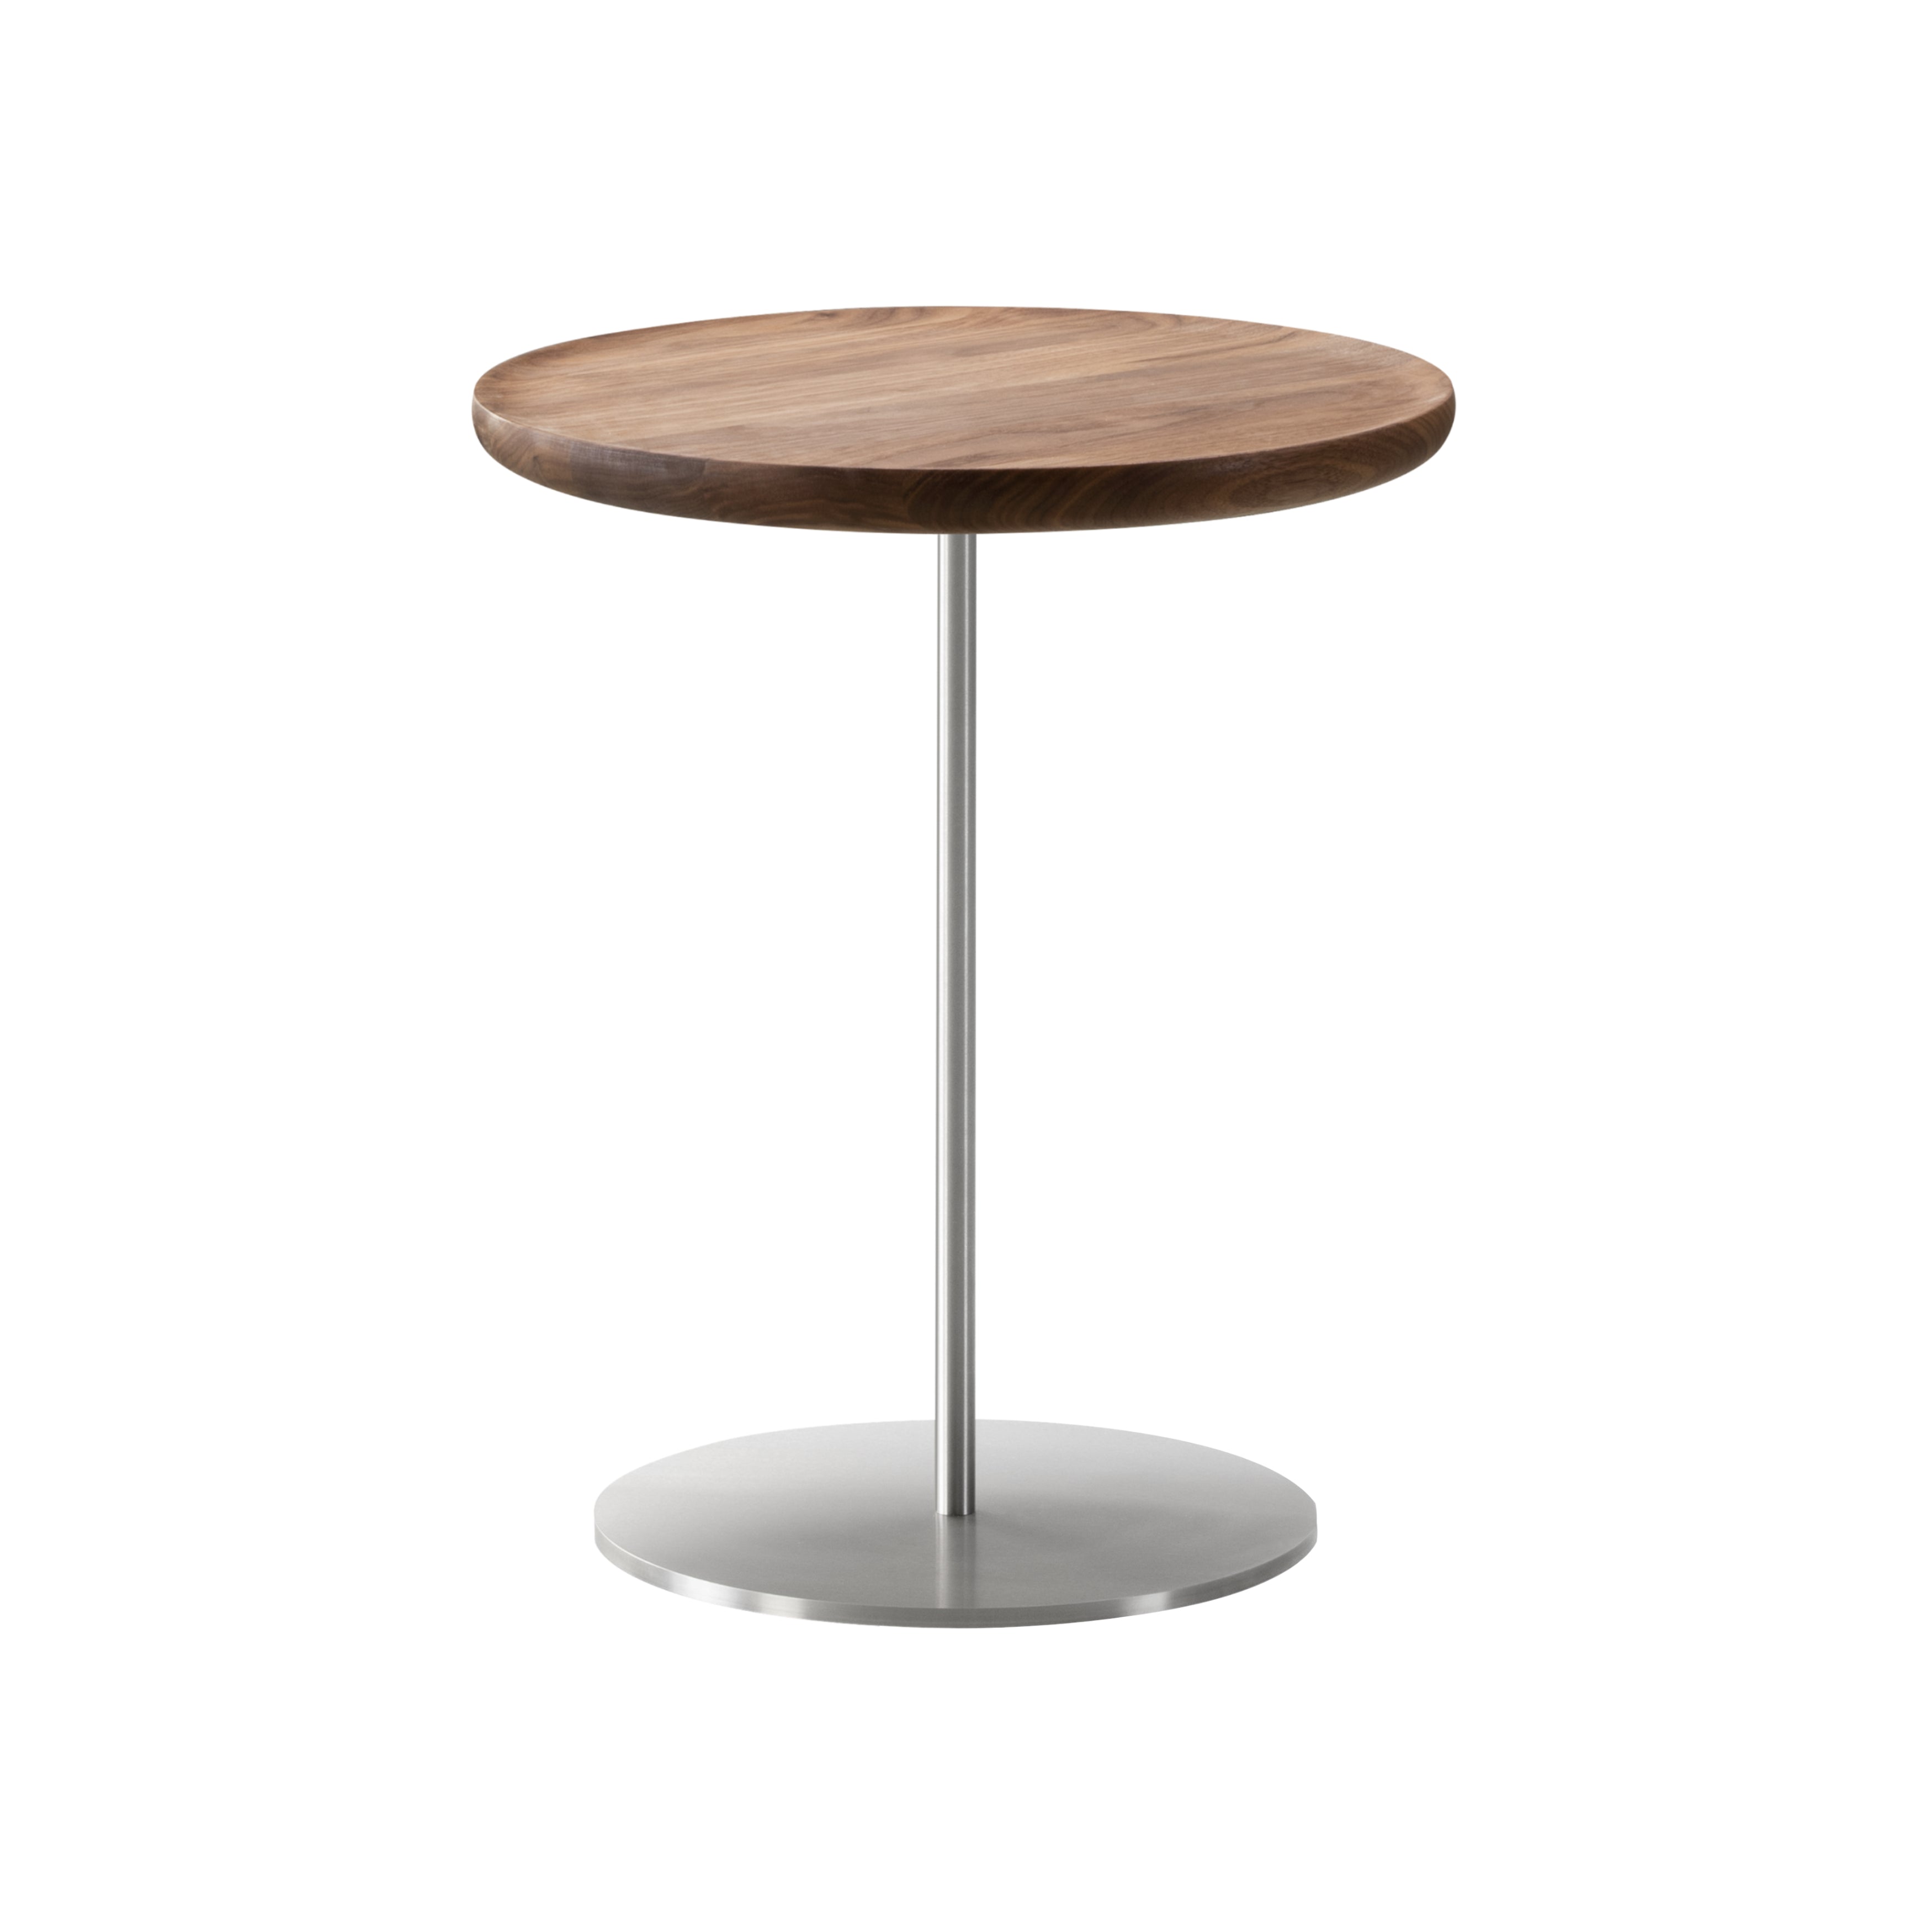 Pal Table: Small + High + Lacquered Walnut + Stainless Steel